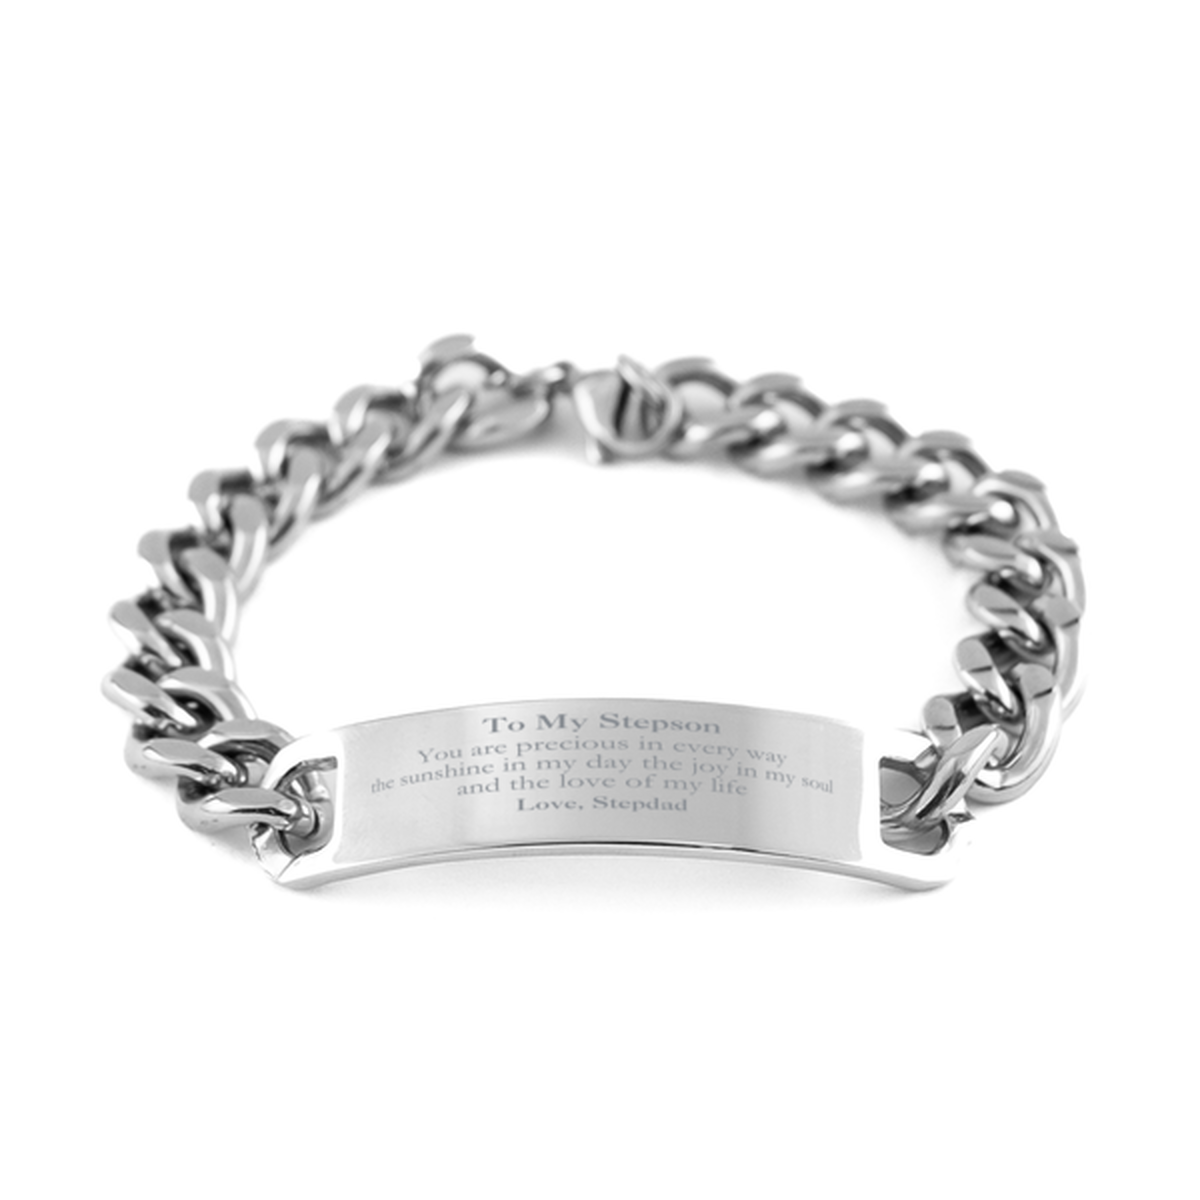 Graduation Gifts for Stepson Cuban Chain Stainless Steel Bracelet Present from Stepdad, Christmas Stepson Birthday Gifts Stepson You are precious in every way the sunshine in my day. Love, Stepdad